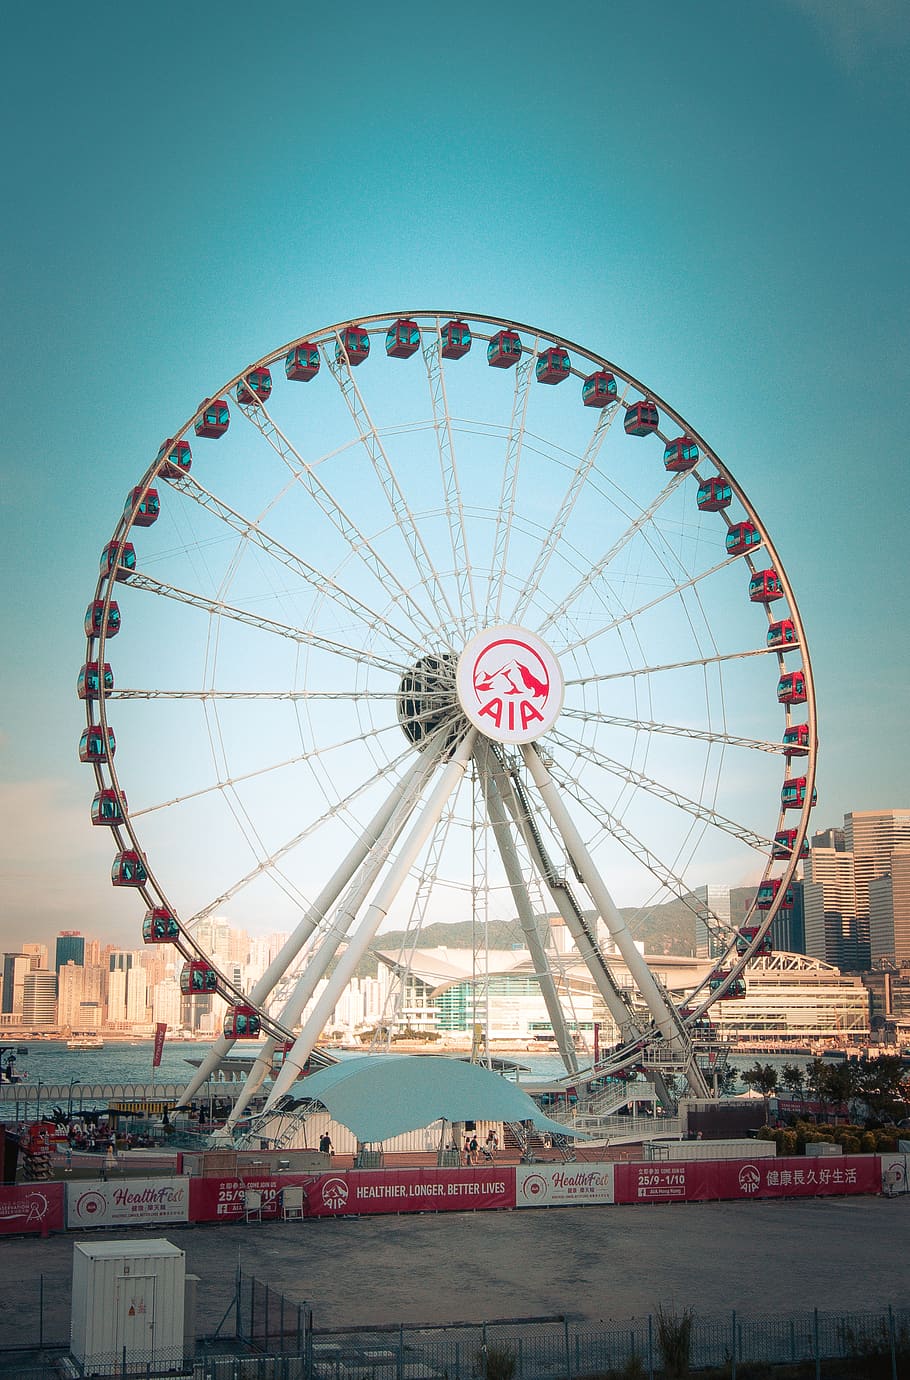 white Aia ferris wheel near body of water and building during daytime